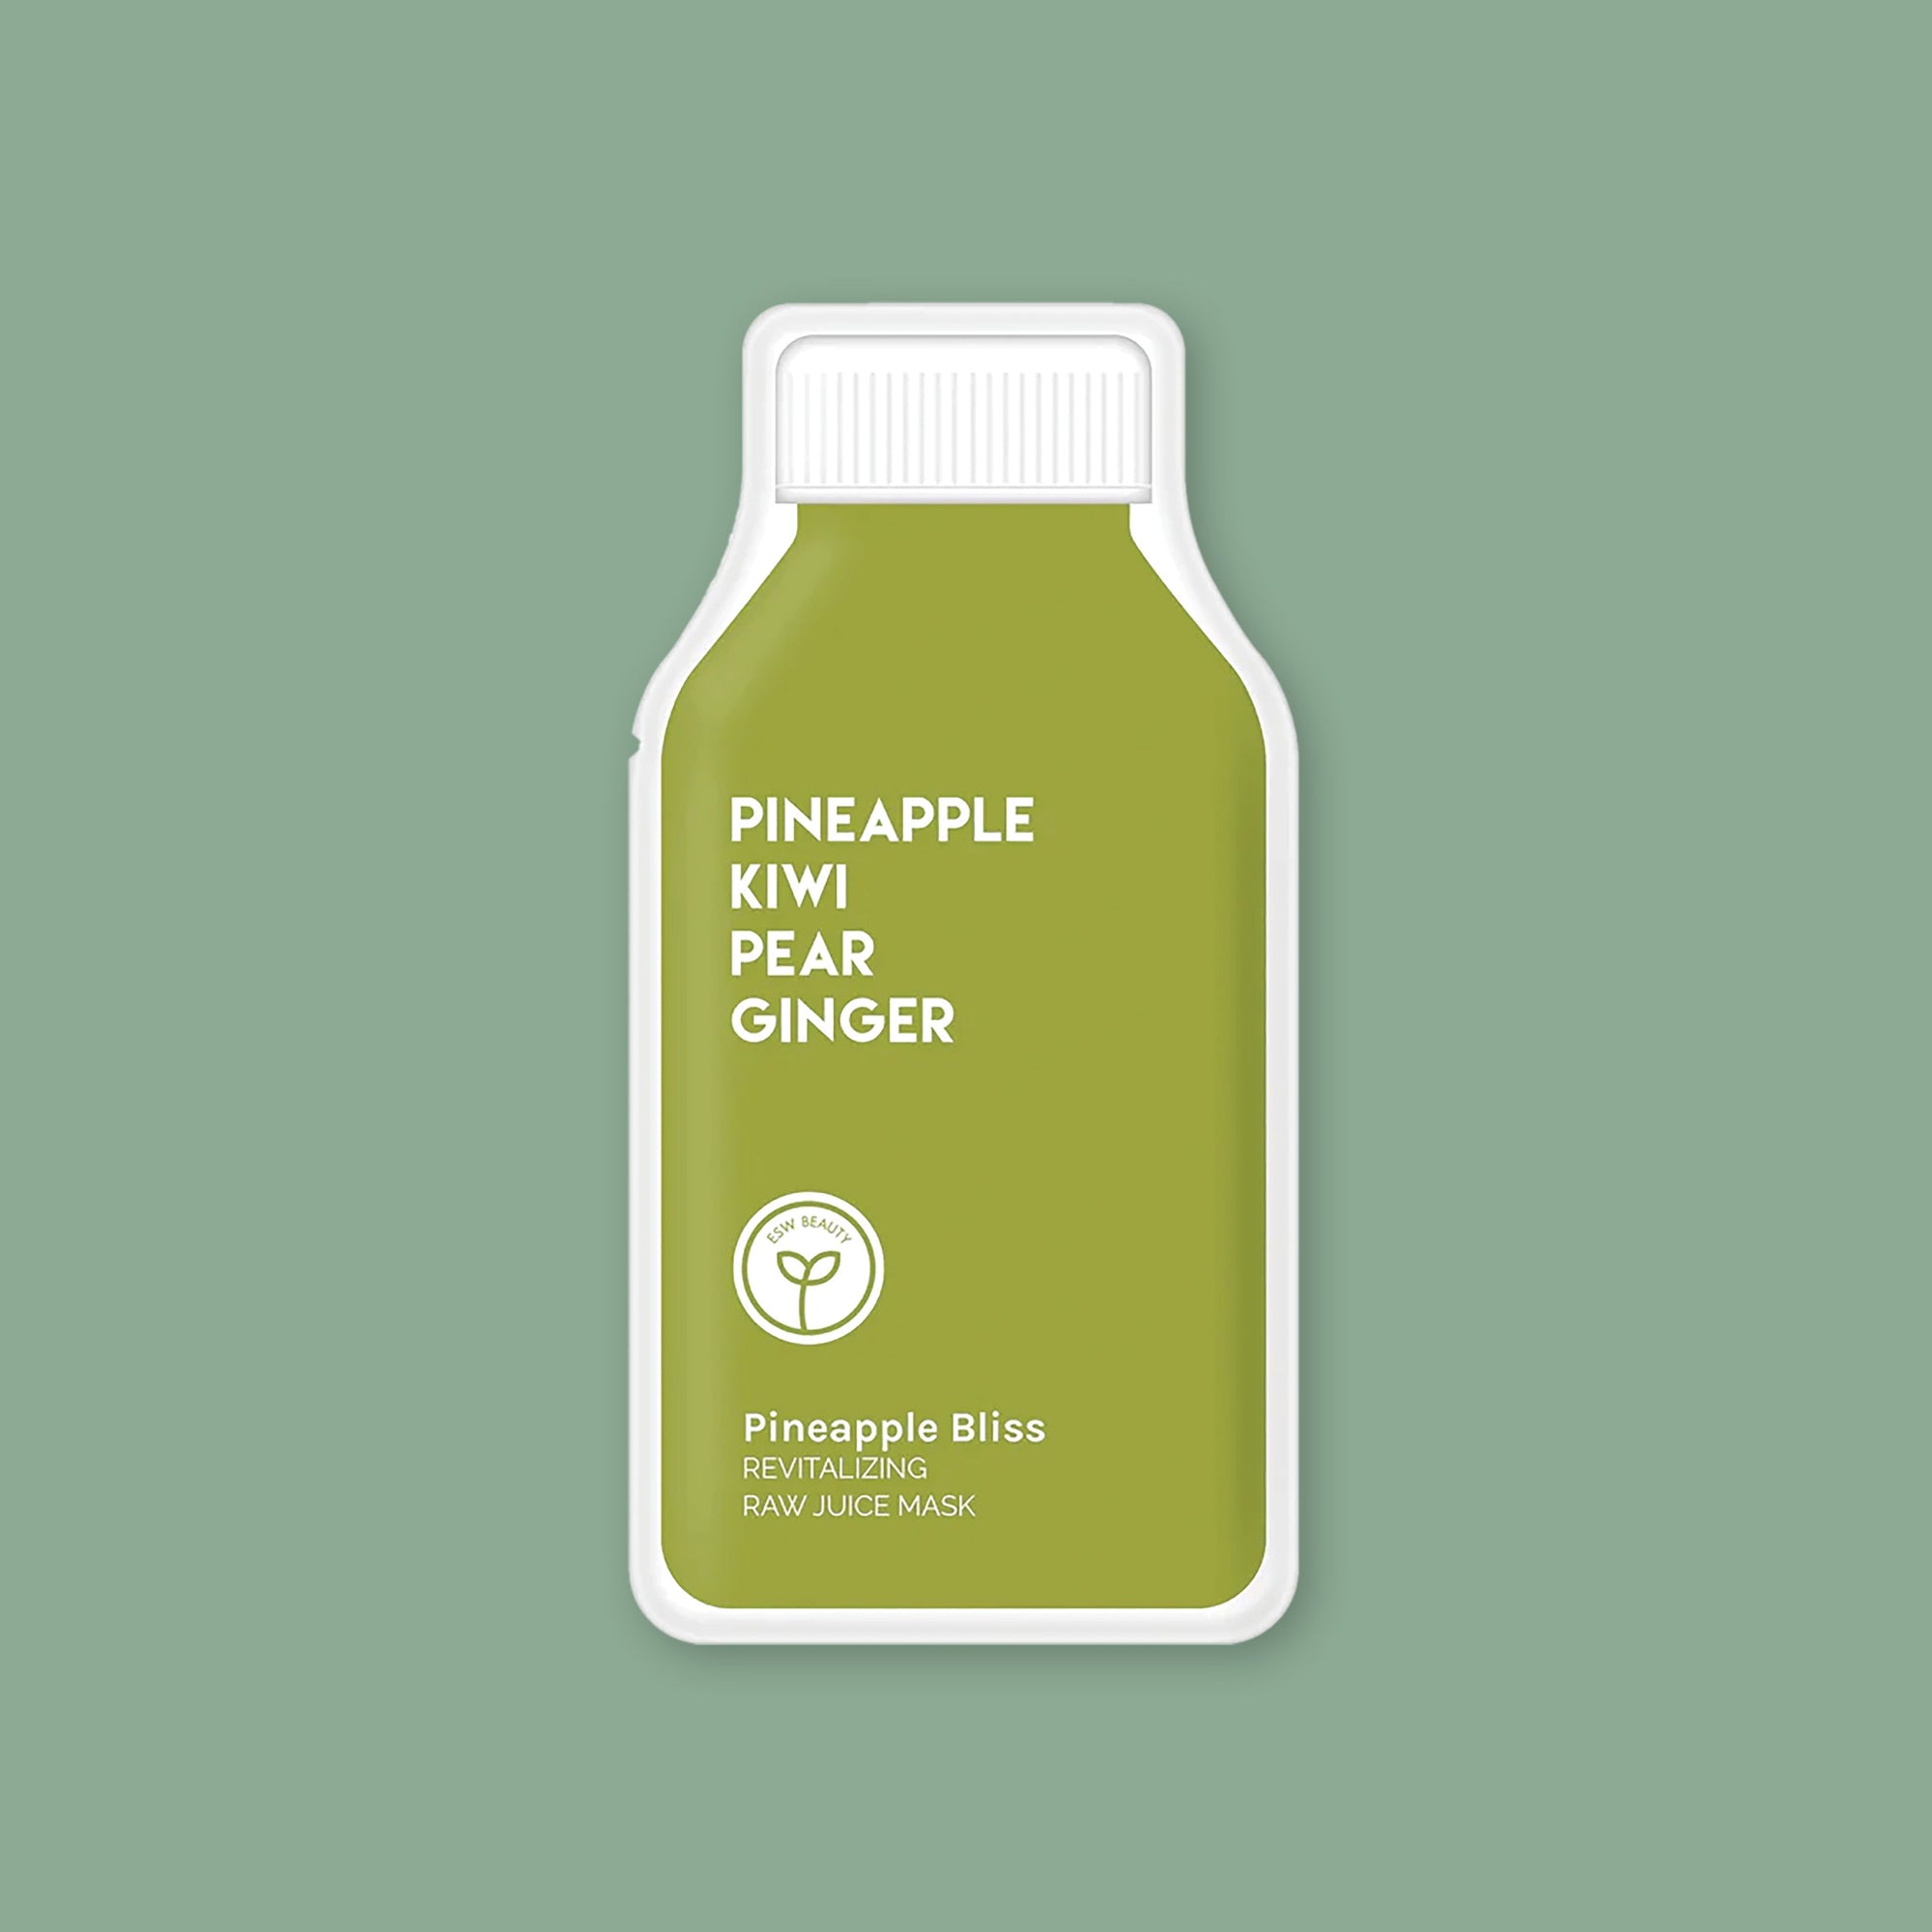 On a moss green background sits a pouch. This apple green puch has a white top and is outline in white. It says "PINEAPPLE KIWI PEAR GINGER" in white, all caps block font. It also says "Pineapple Bliss" and "REVITALIZING RAW JUICE MASK" in white, block font. 